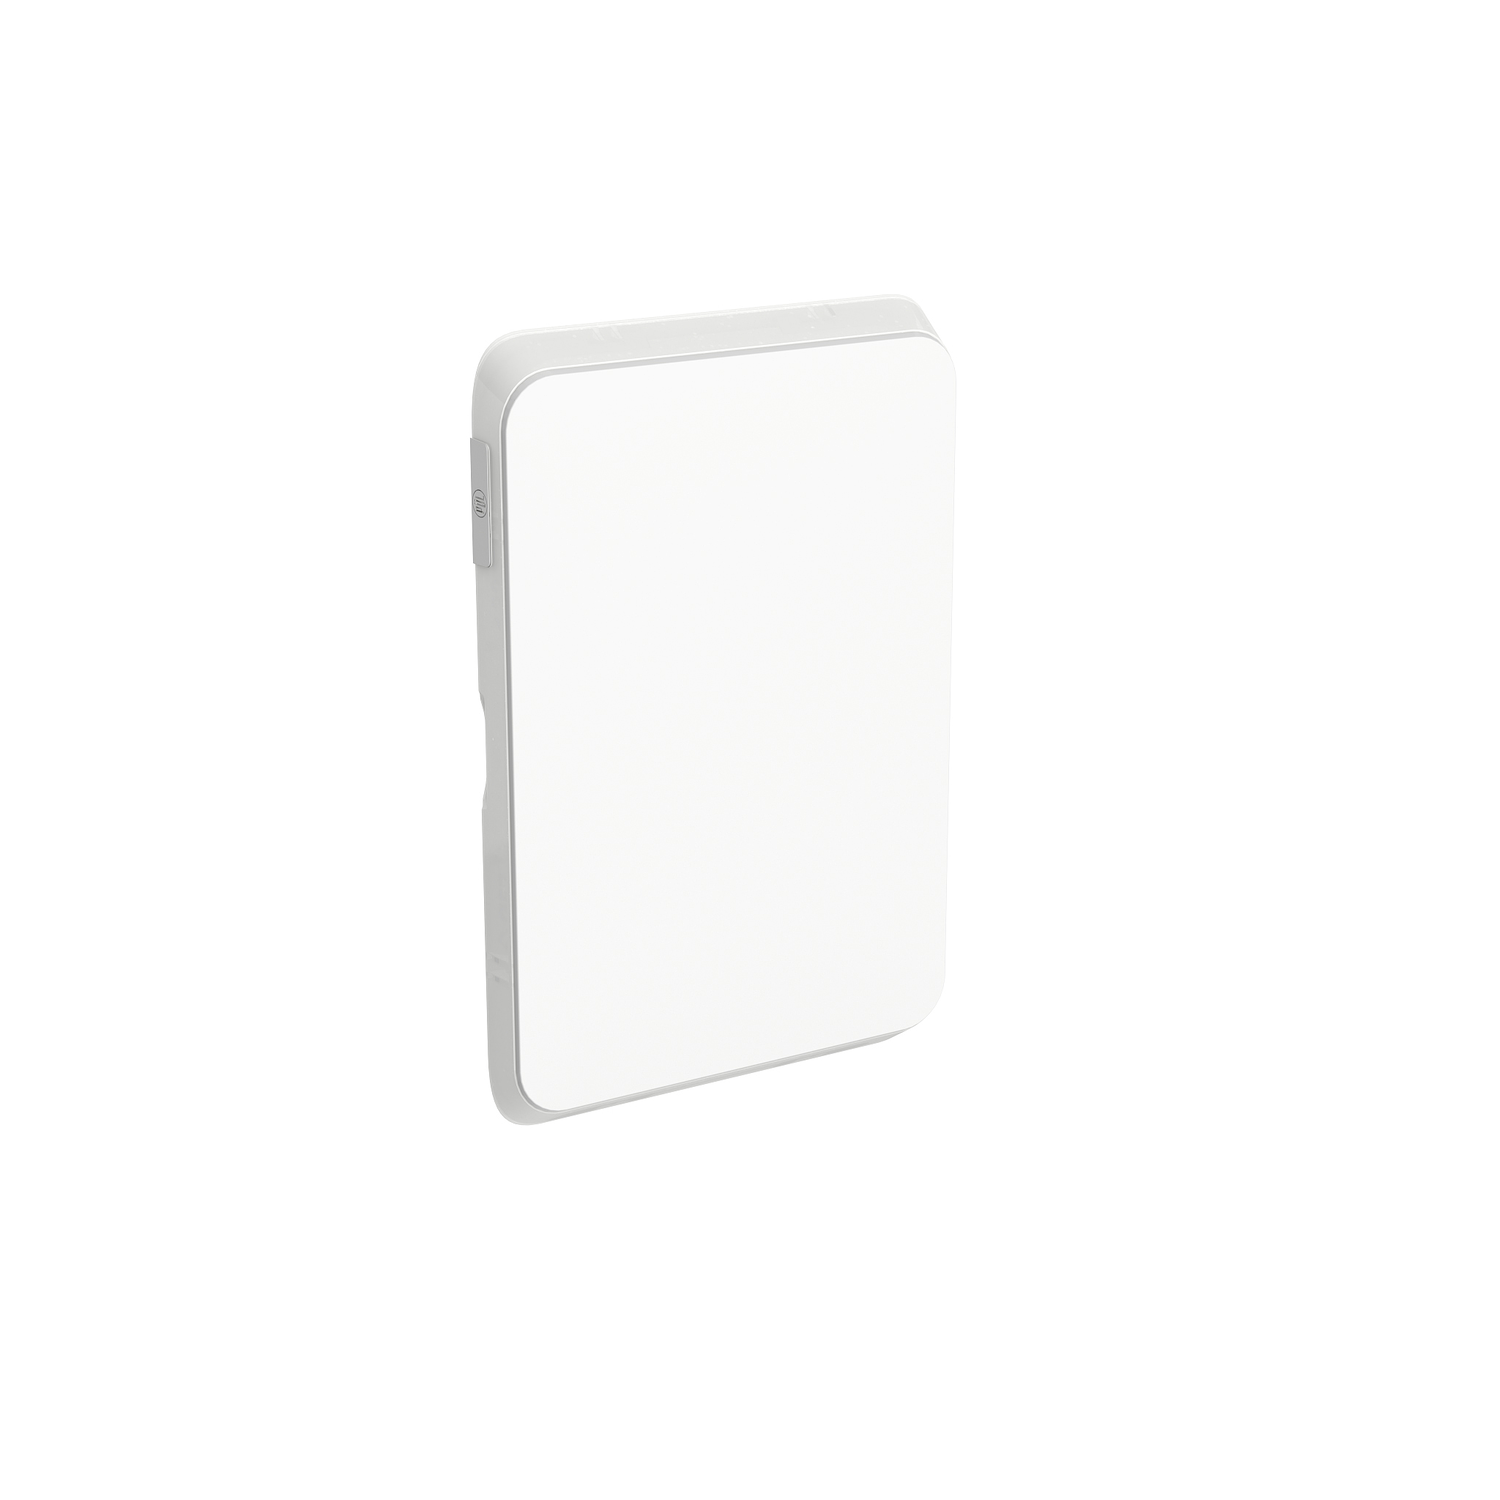 PDL Iconic - Cover Plate Blank Plate - Vivid White